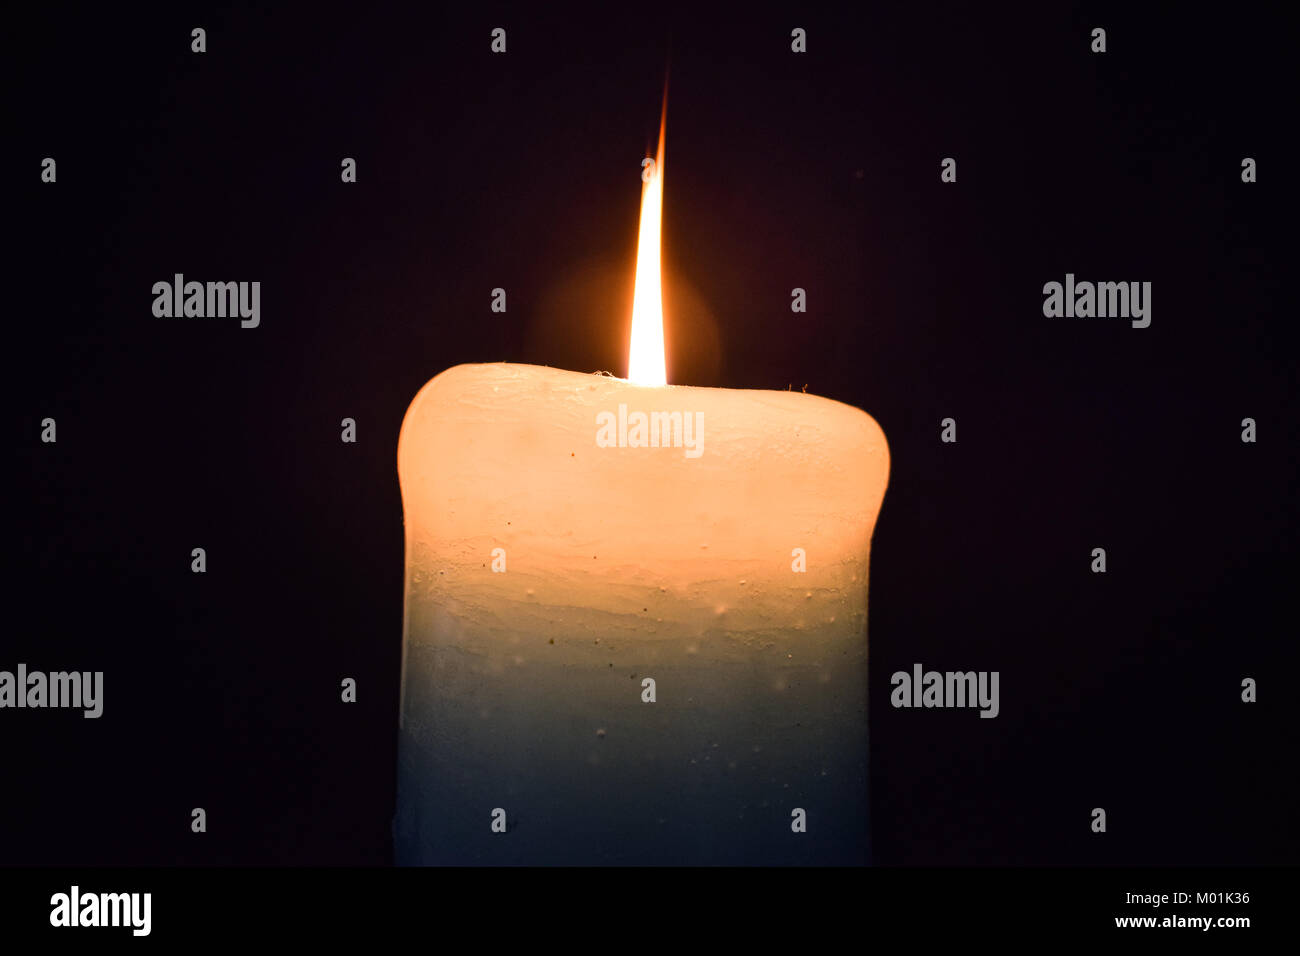 Candles home decoration Stock Photo